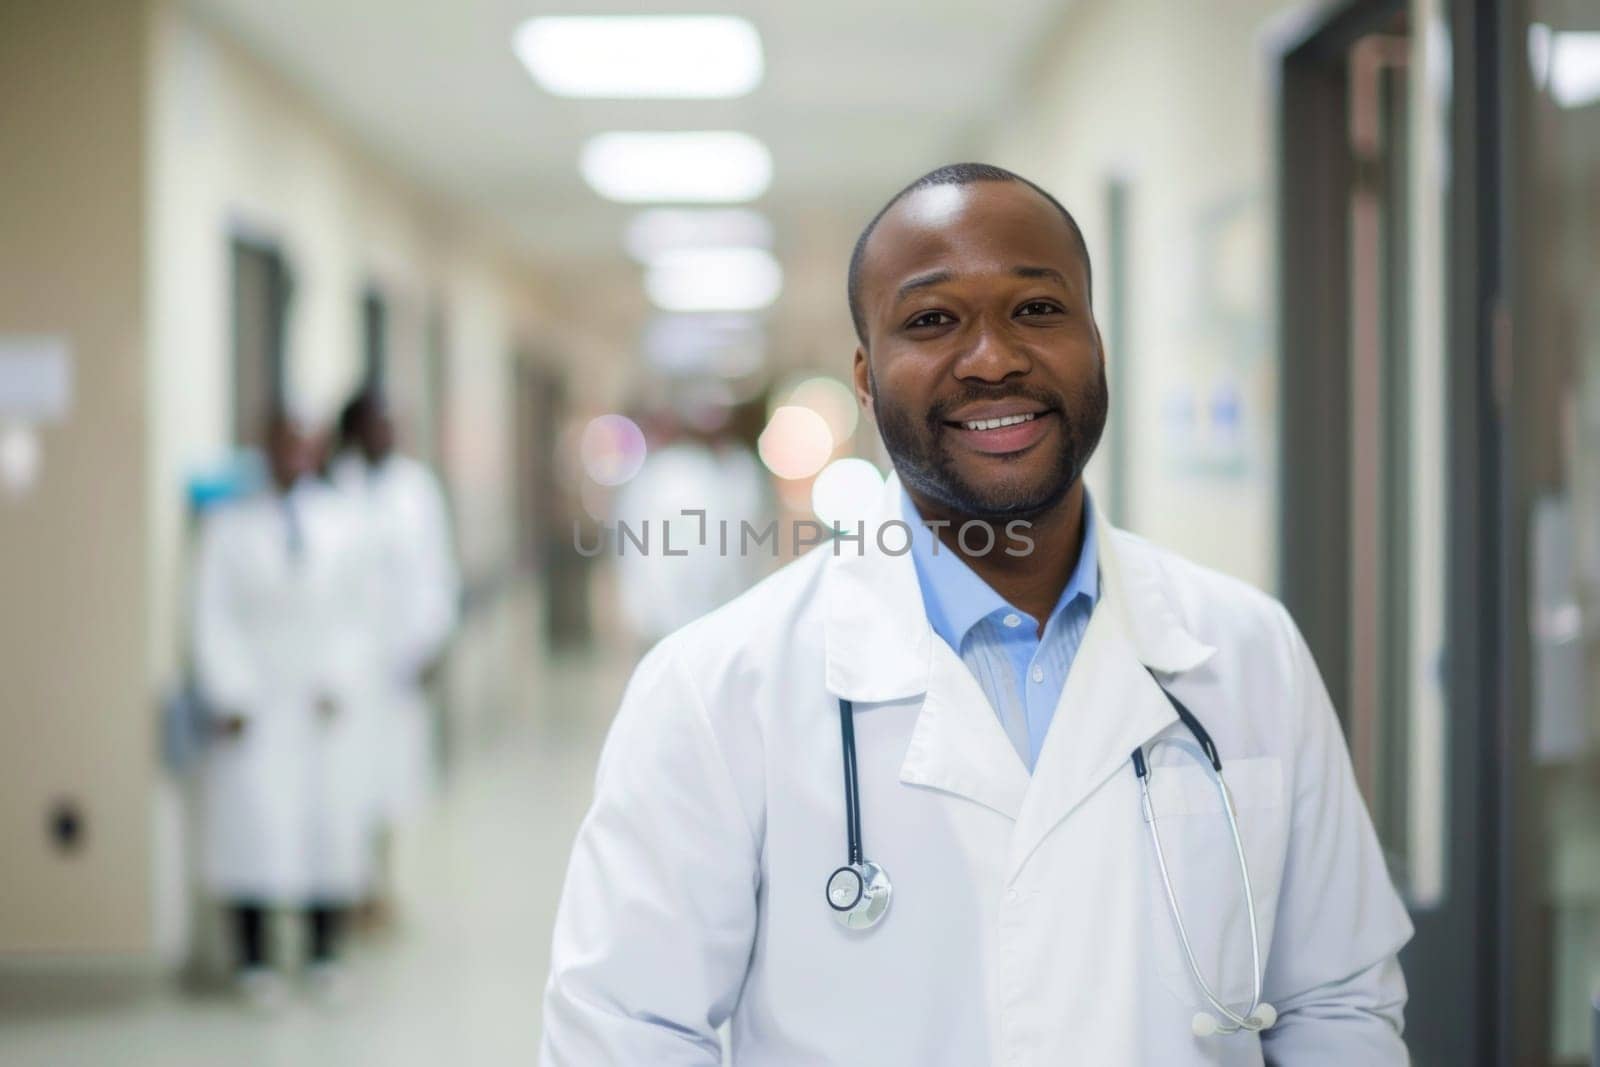 Black smiling doctor in a hospital hallway against the background of other blurred doctors.